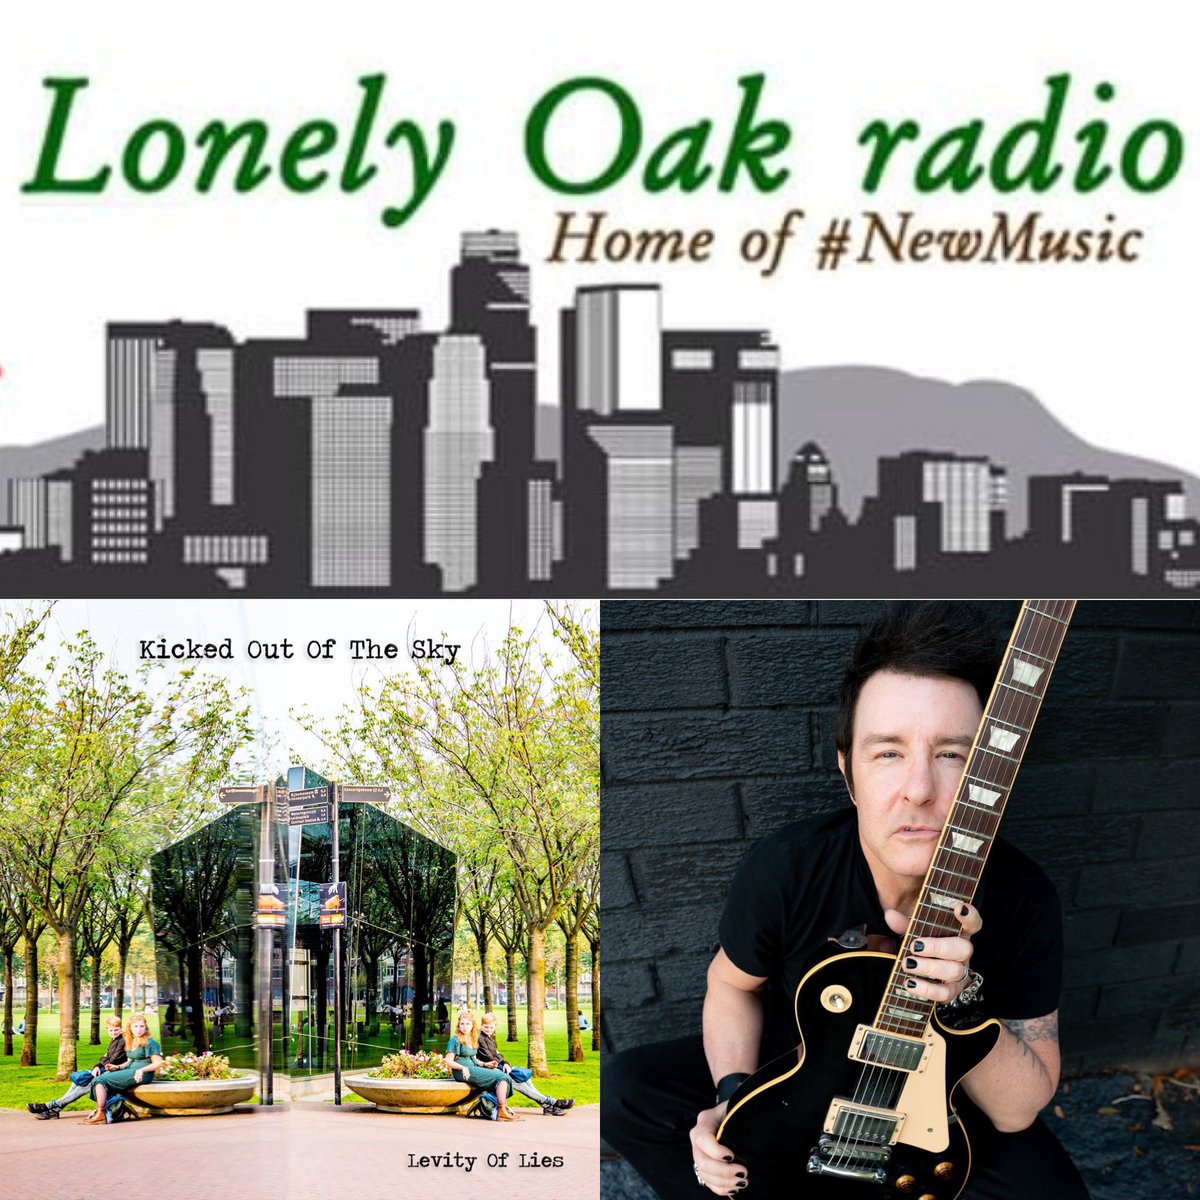 Tune in Sat. 05.18.24 at 10:44am & 10:44pm PST to hear “Walk Away”by Kicked Out Of The Sky on @LonelyOakRadio #NewMusic show! Thank you Lonely Oak Radio for your support!! Xx Radio link: lonelyoakradio.com/OpenVault EP link: open.spotify.com/album/1sbV07Fo…